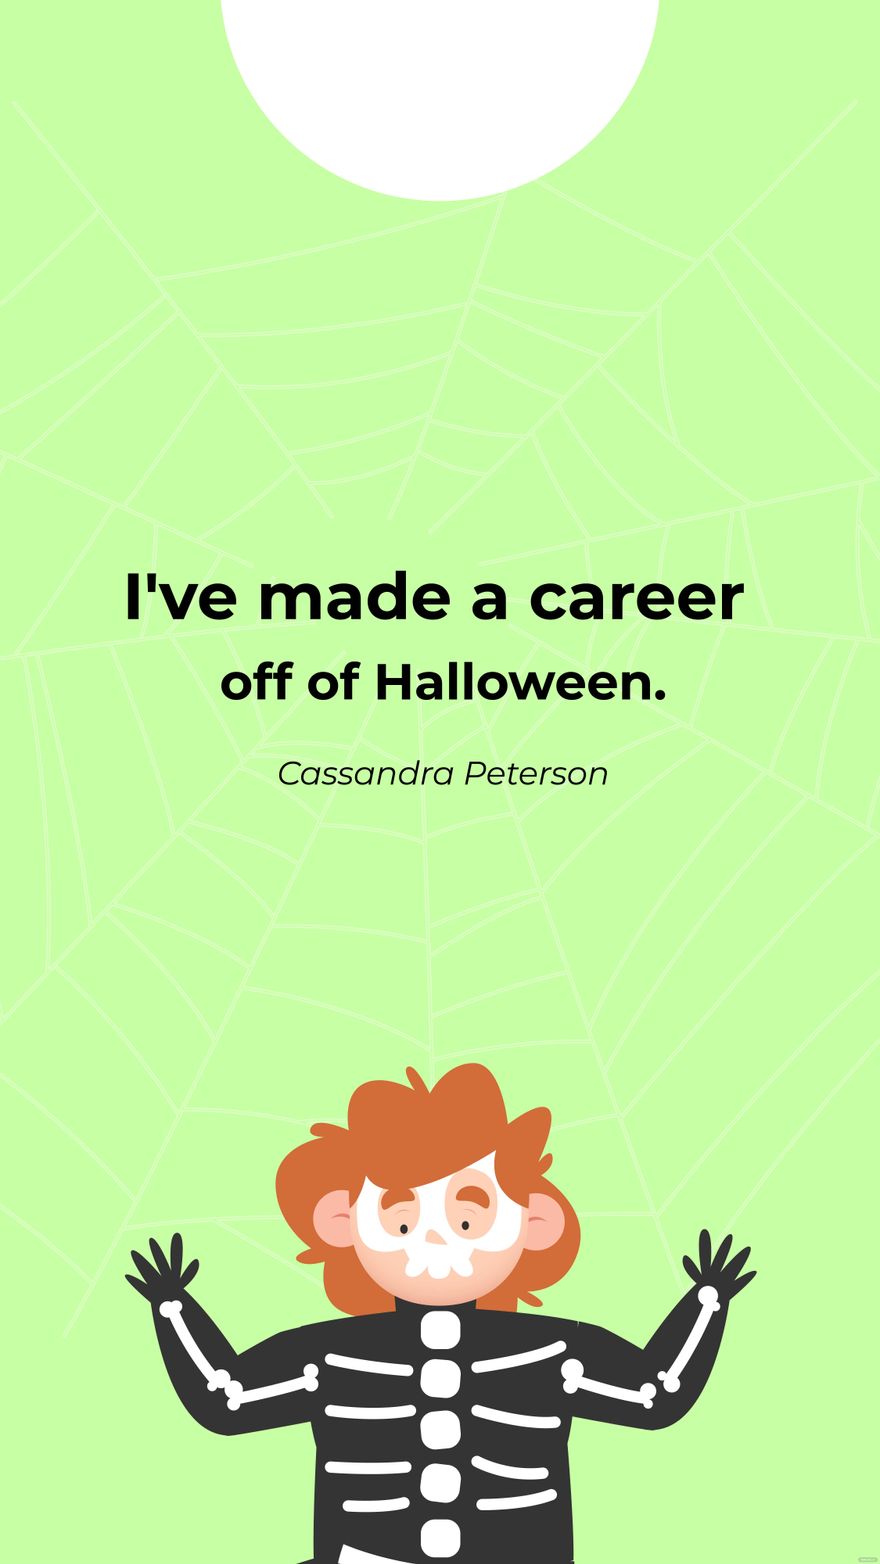 Free Cassandra Peterson- I've made a career off of Halloween.  in JPG